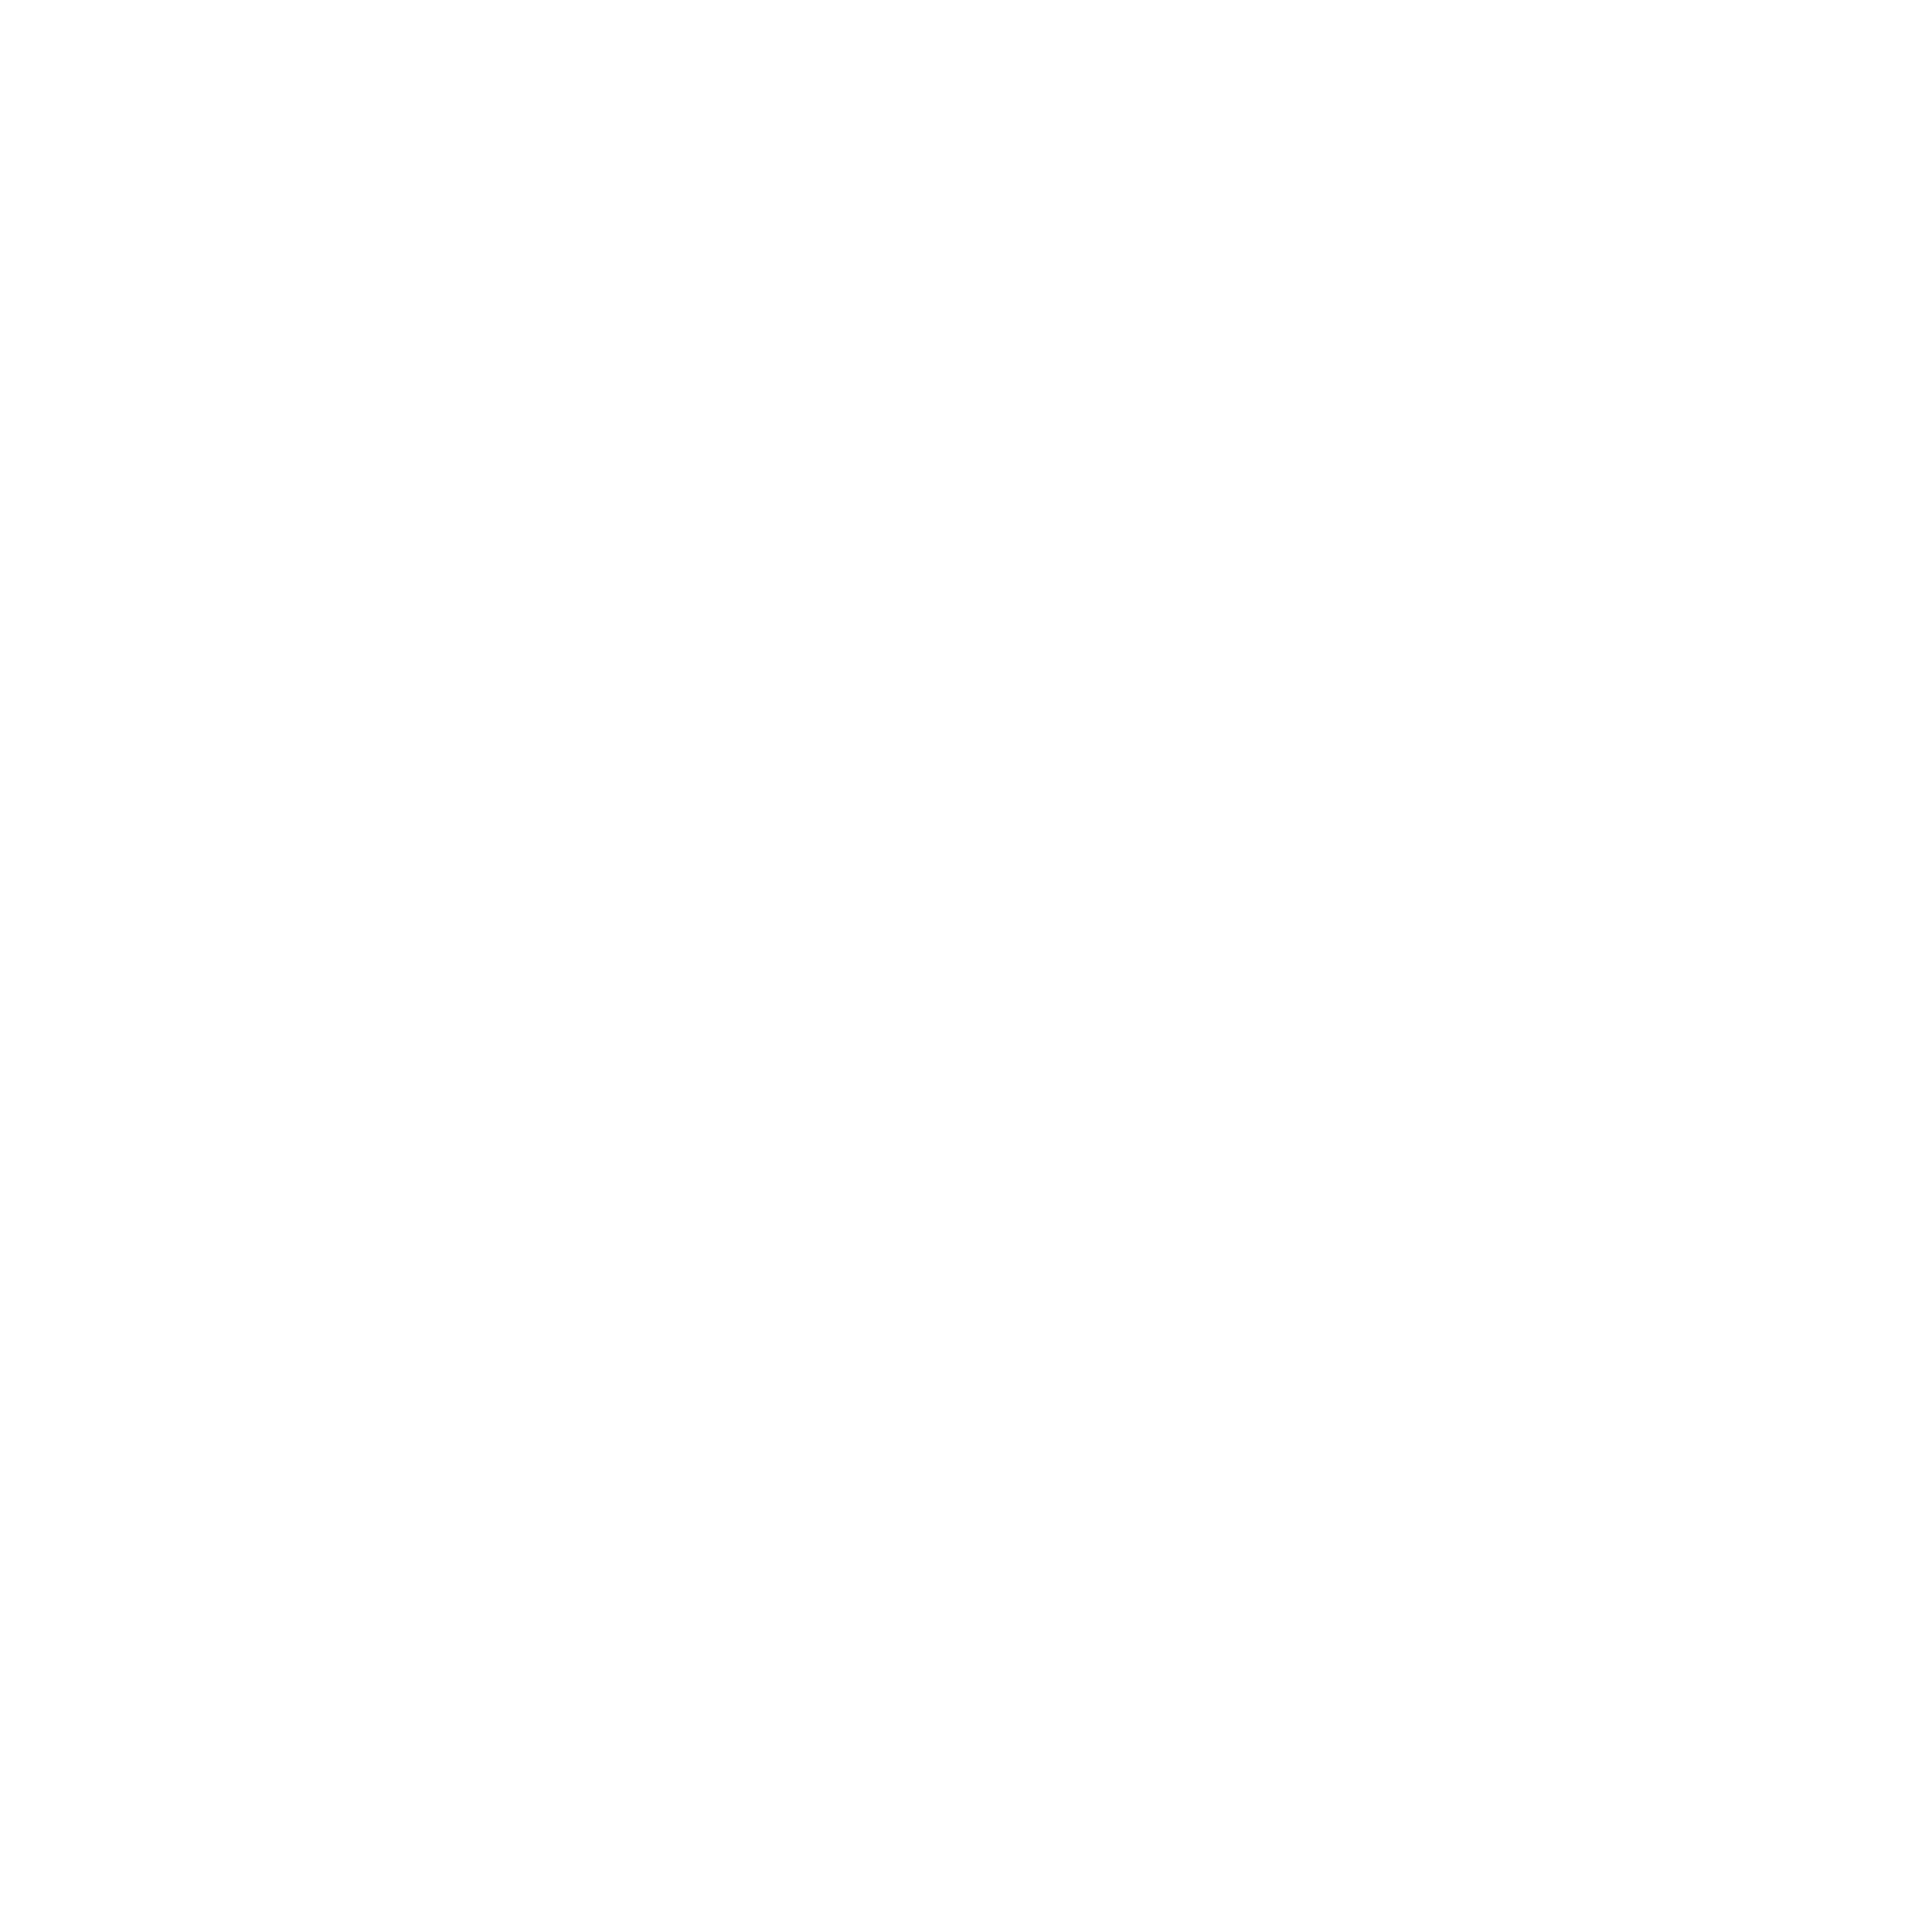 Manpower Singapore Services, Contact Info | Clutch.co